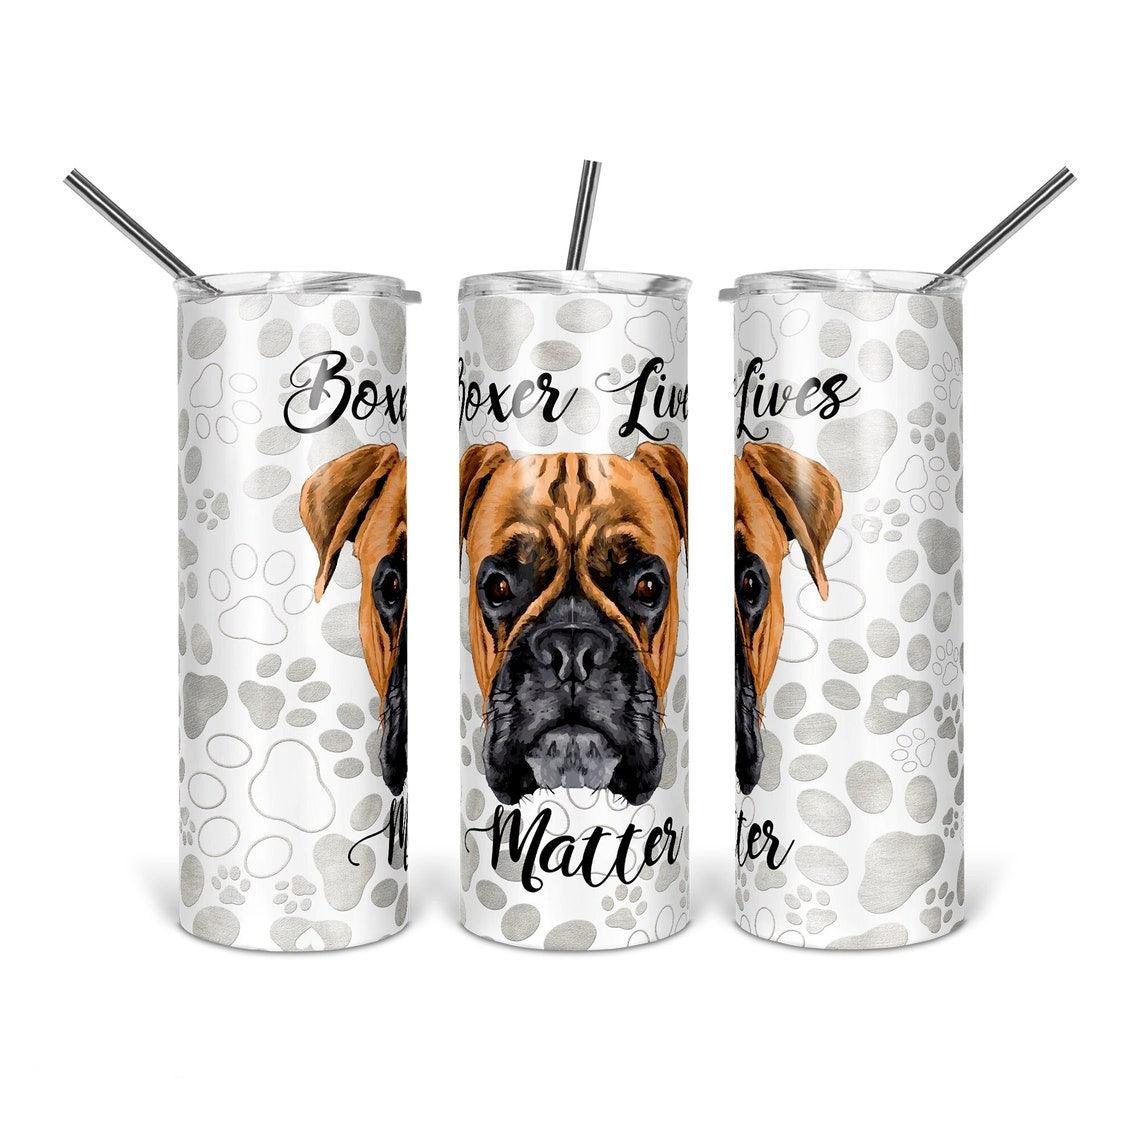 Boxer Lives Matter 30 oz. Straight Skinny Tumbler by SSC Designs - Scrapbook Supply Companies